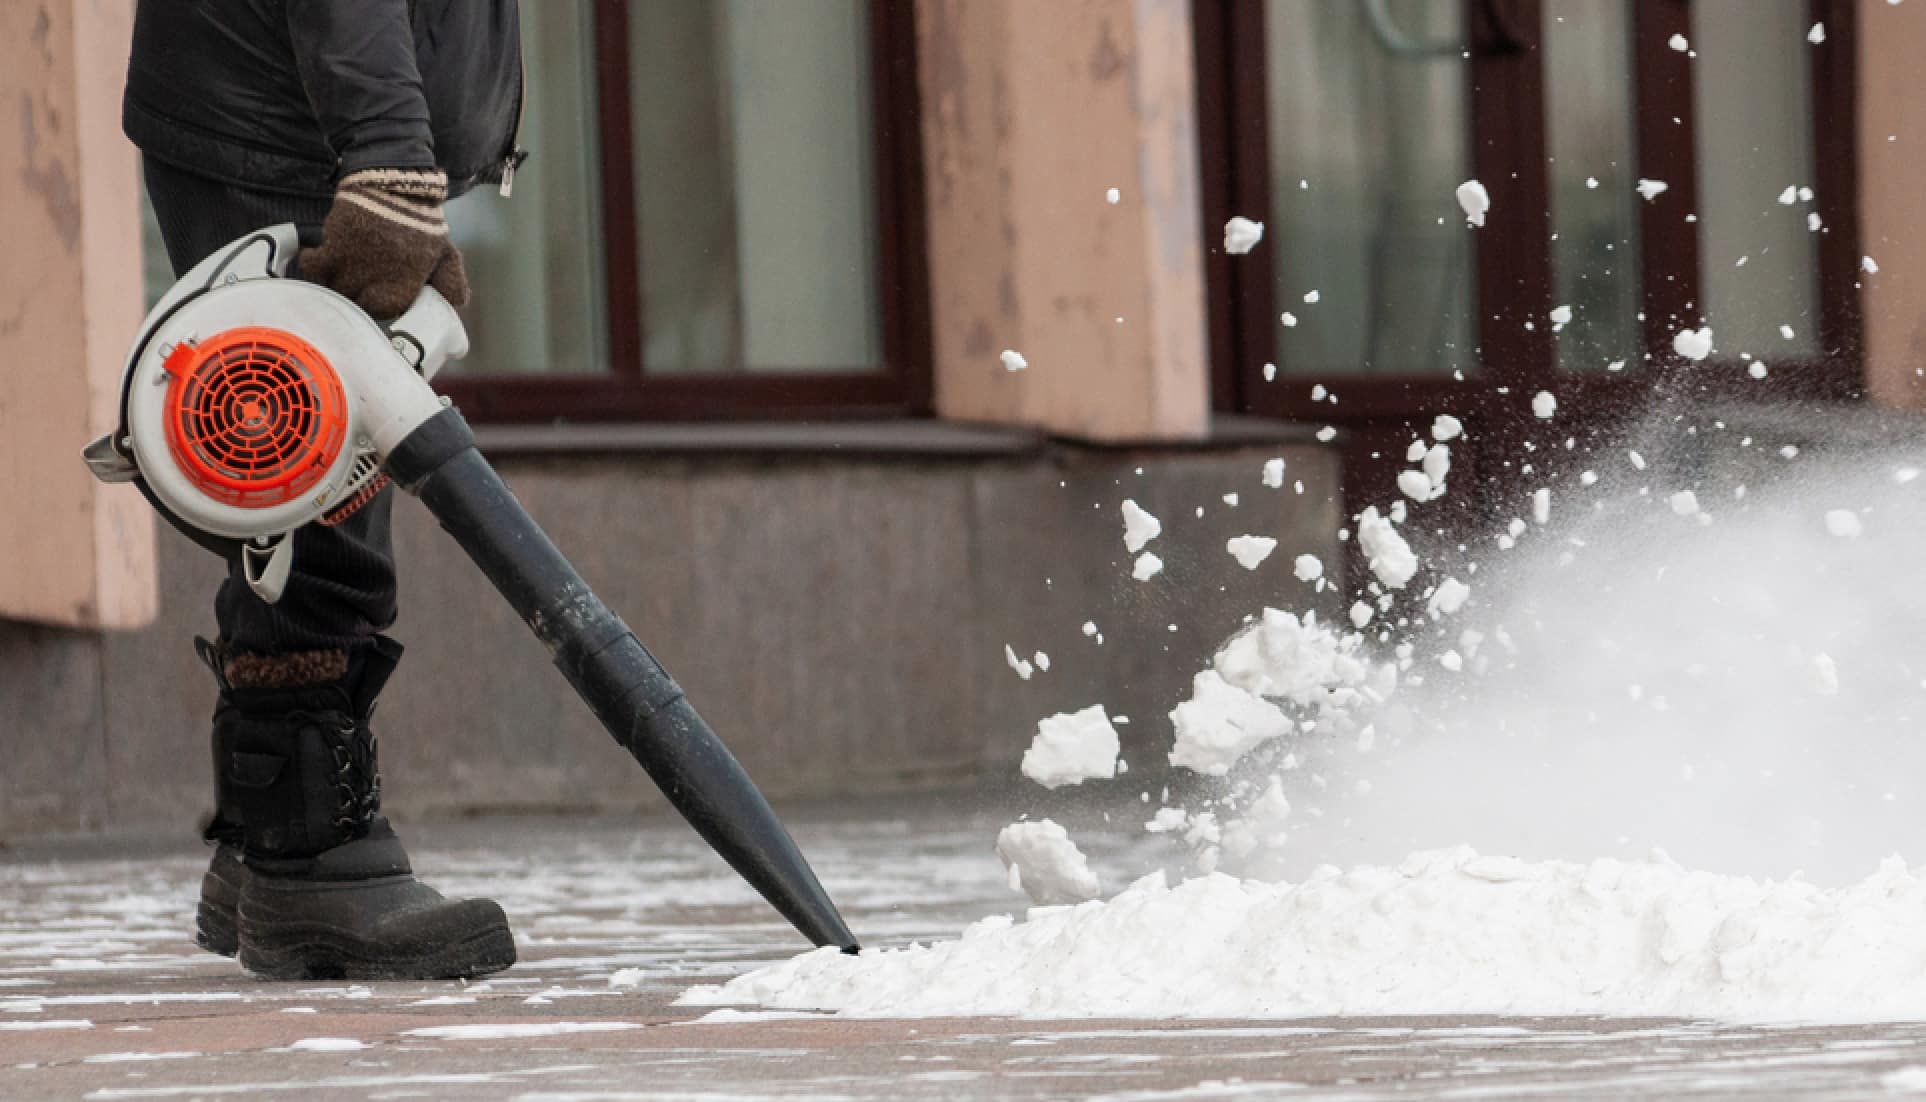 Using a leaf blower to clear snow